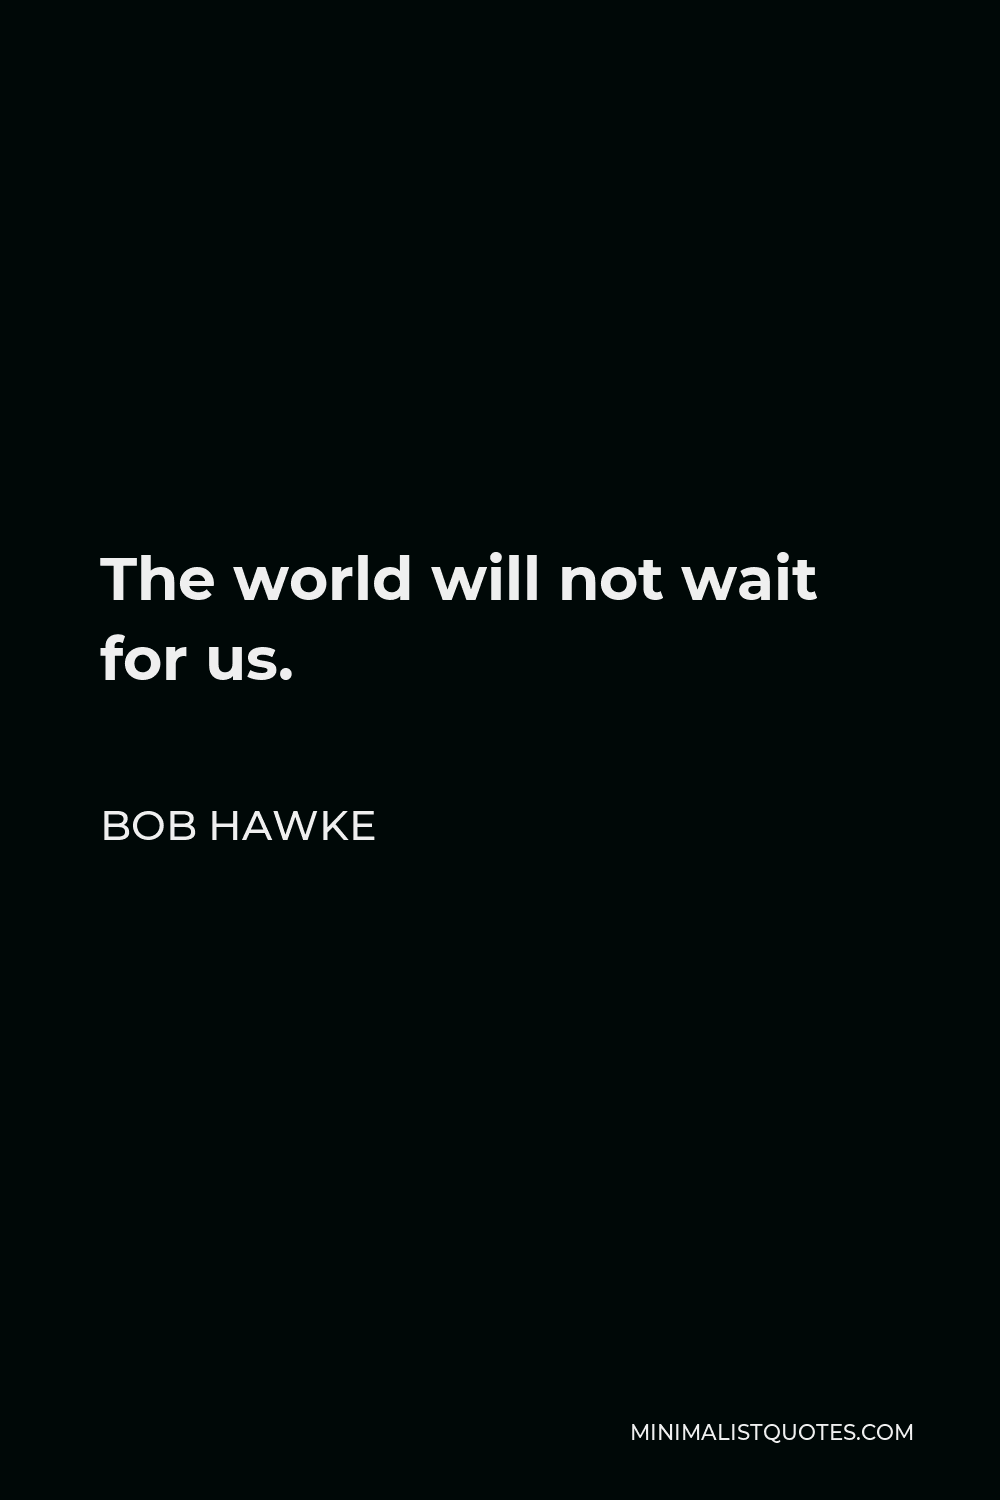 Bob Hawke Quote - The world will not wait for us.